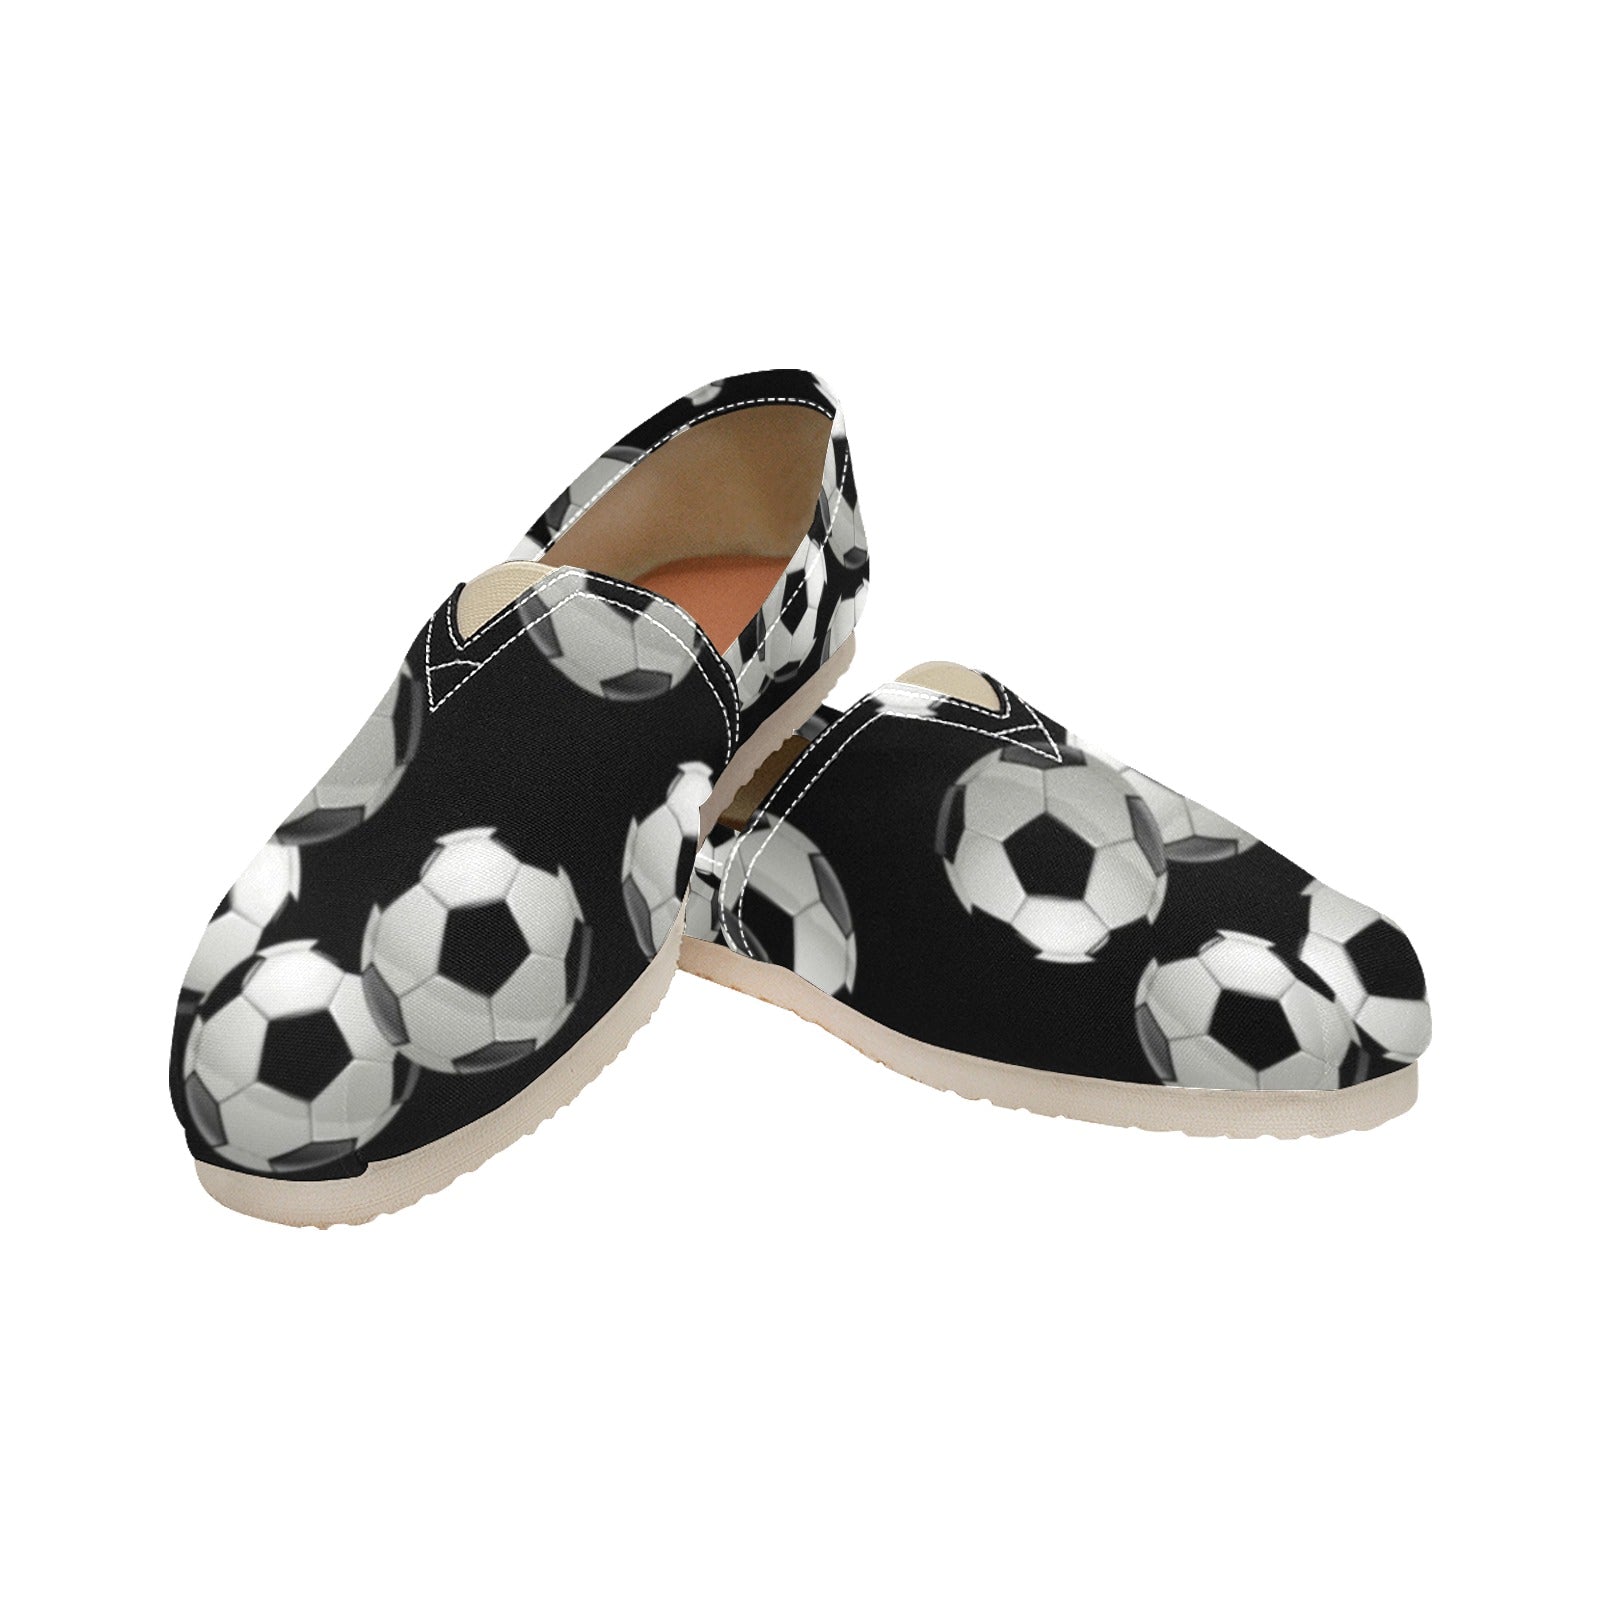 Soccer - Casual Canvas Slip-on Shoes